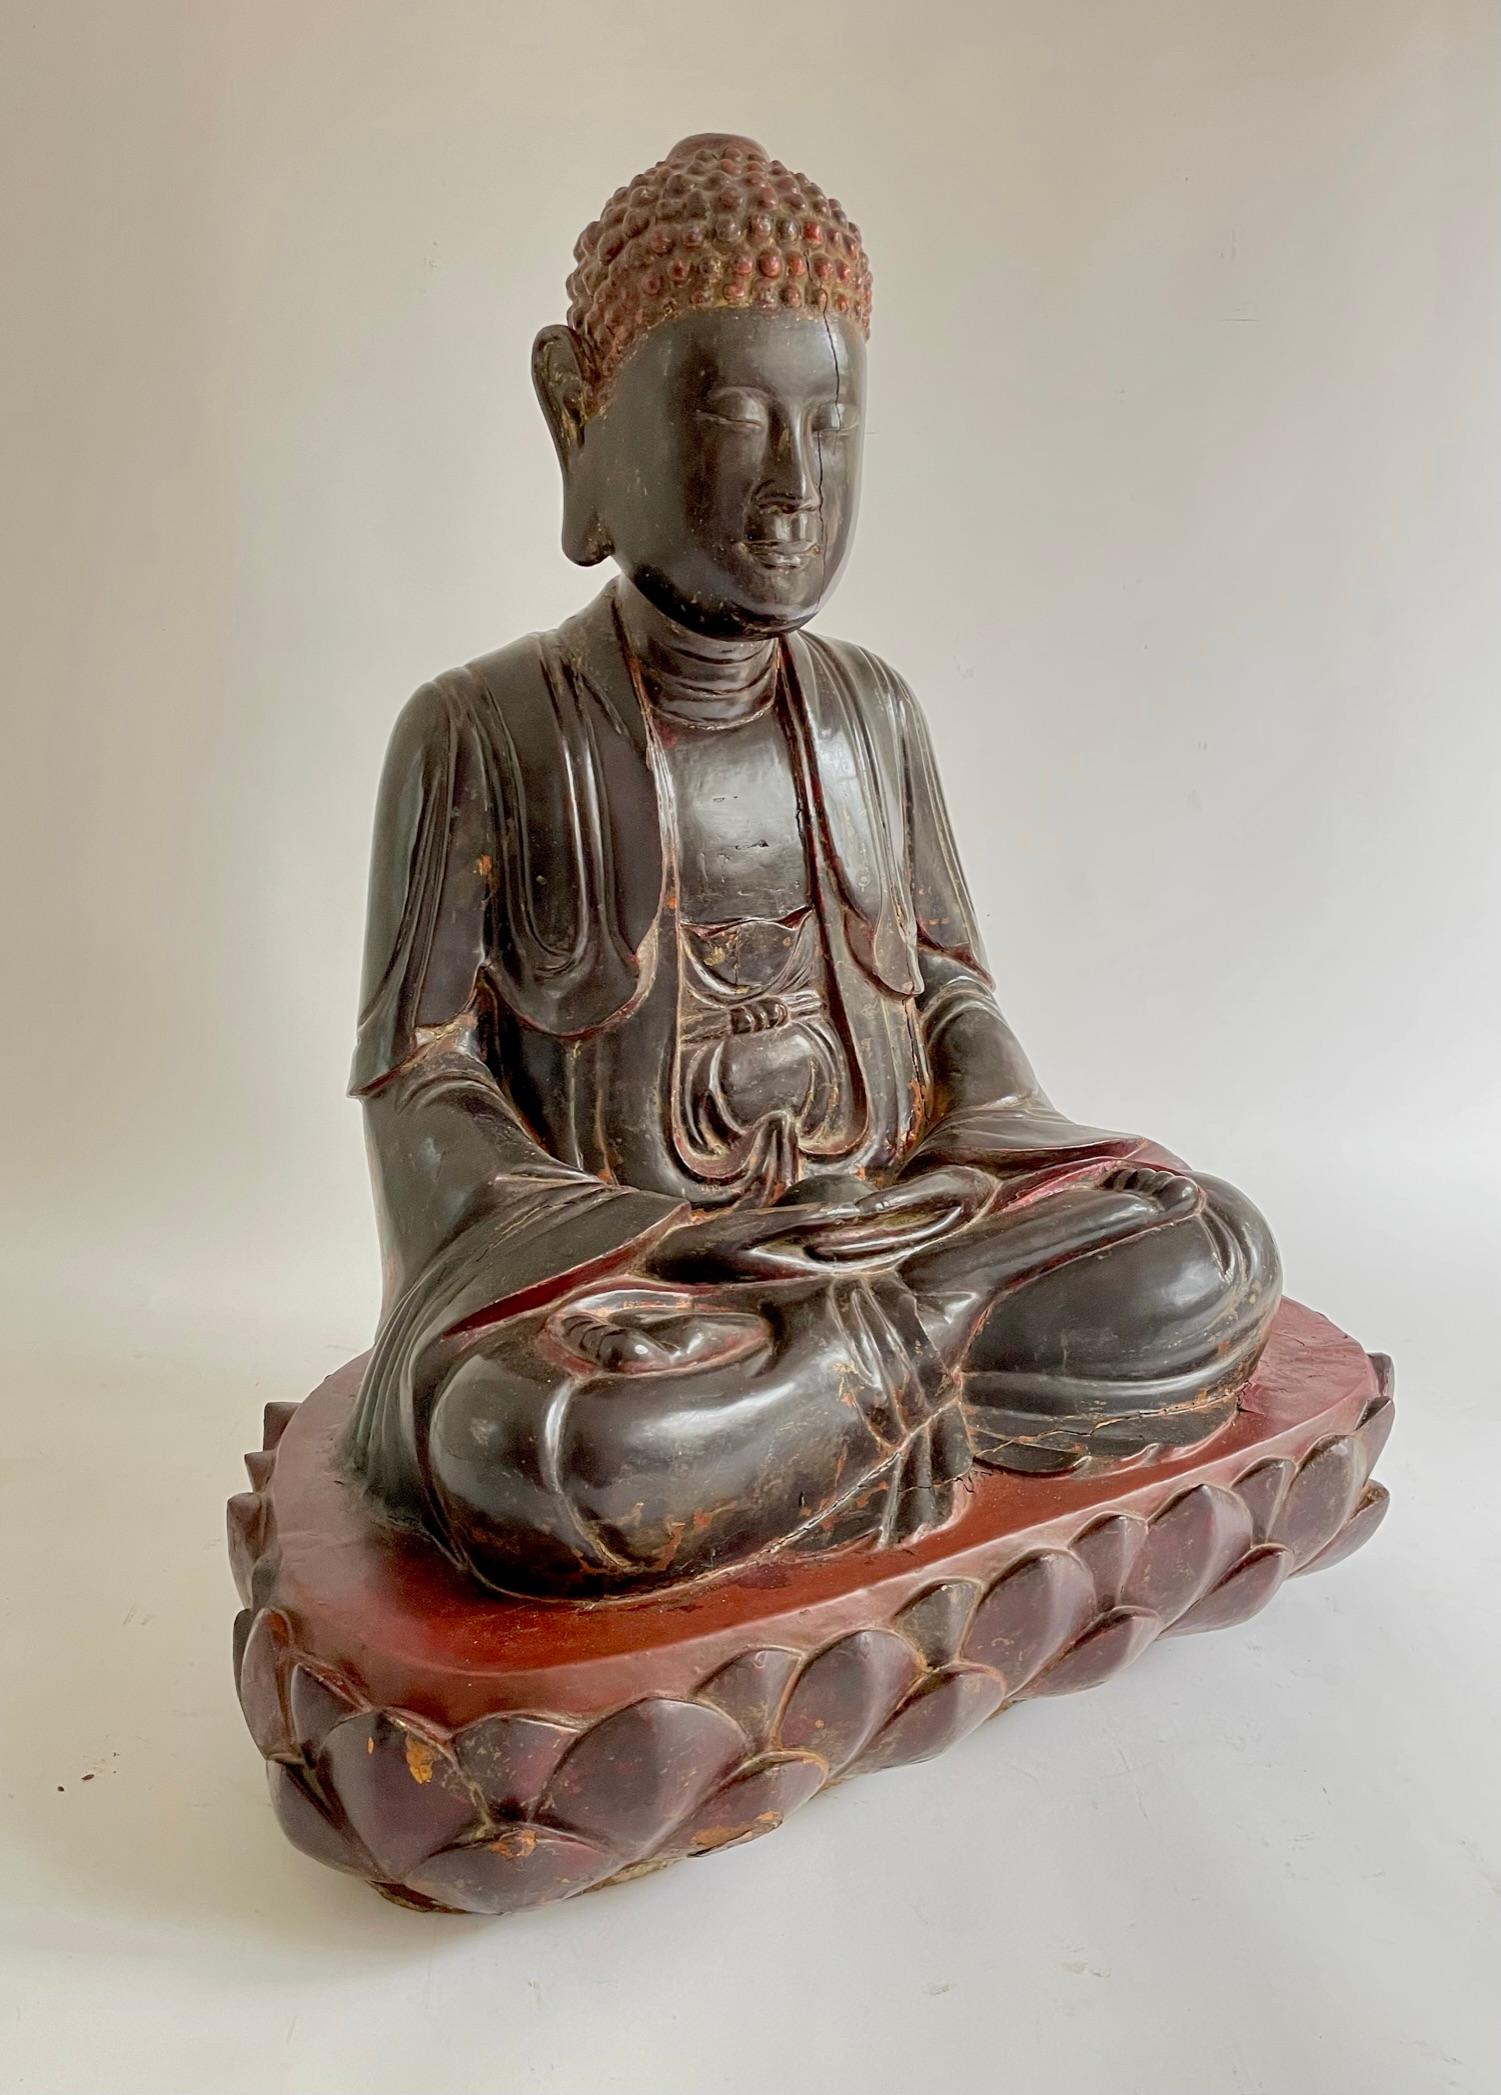 A highly decorative early 19th century Vietnamese carved wooden and polychrome painted Buddha with traces of original gilding, creating a beautiful patina. This Buddha has a beautiful, peaceful, benevolent face, seated in a meditation pose with